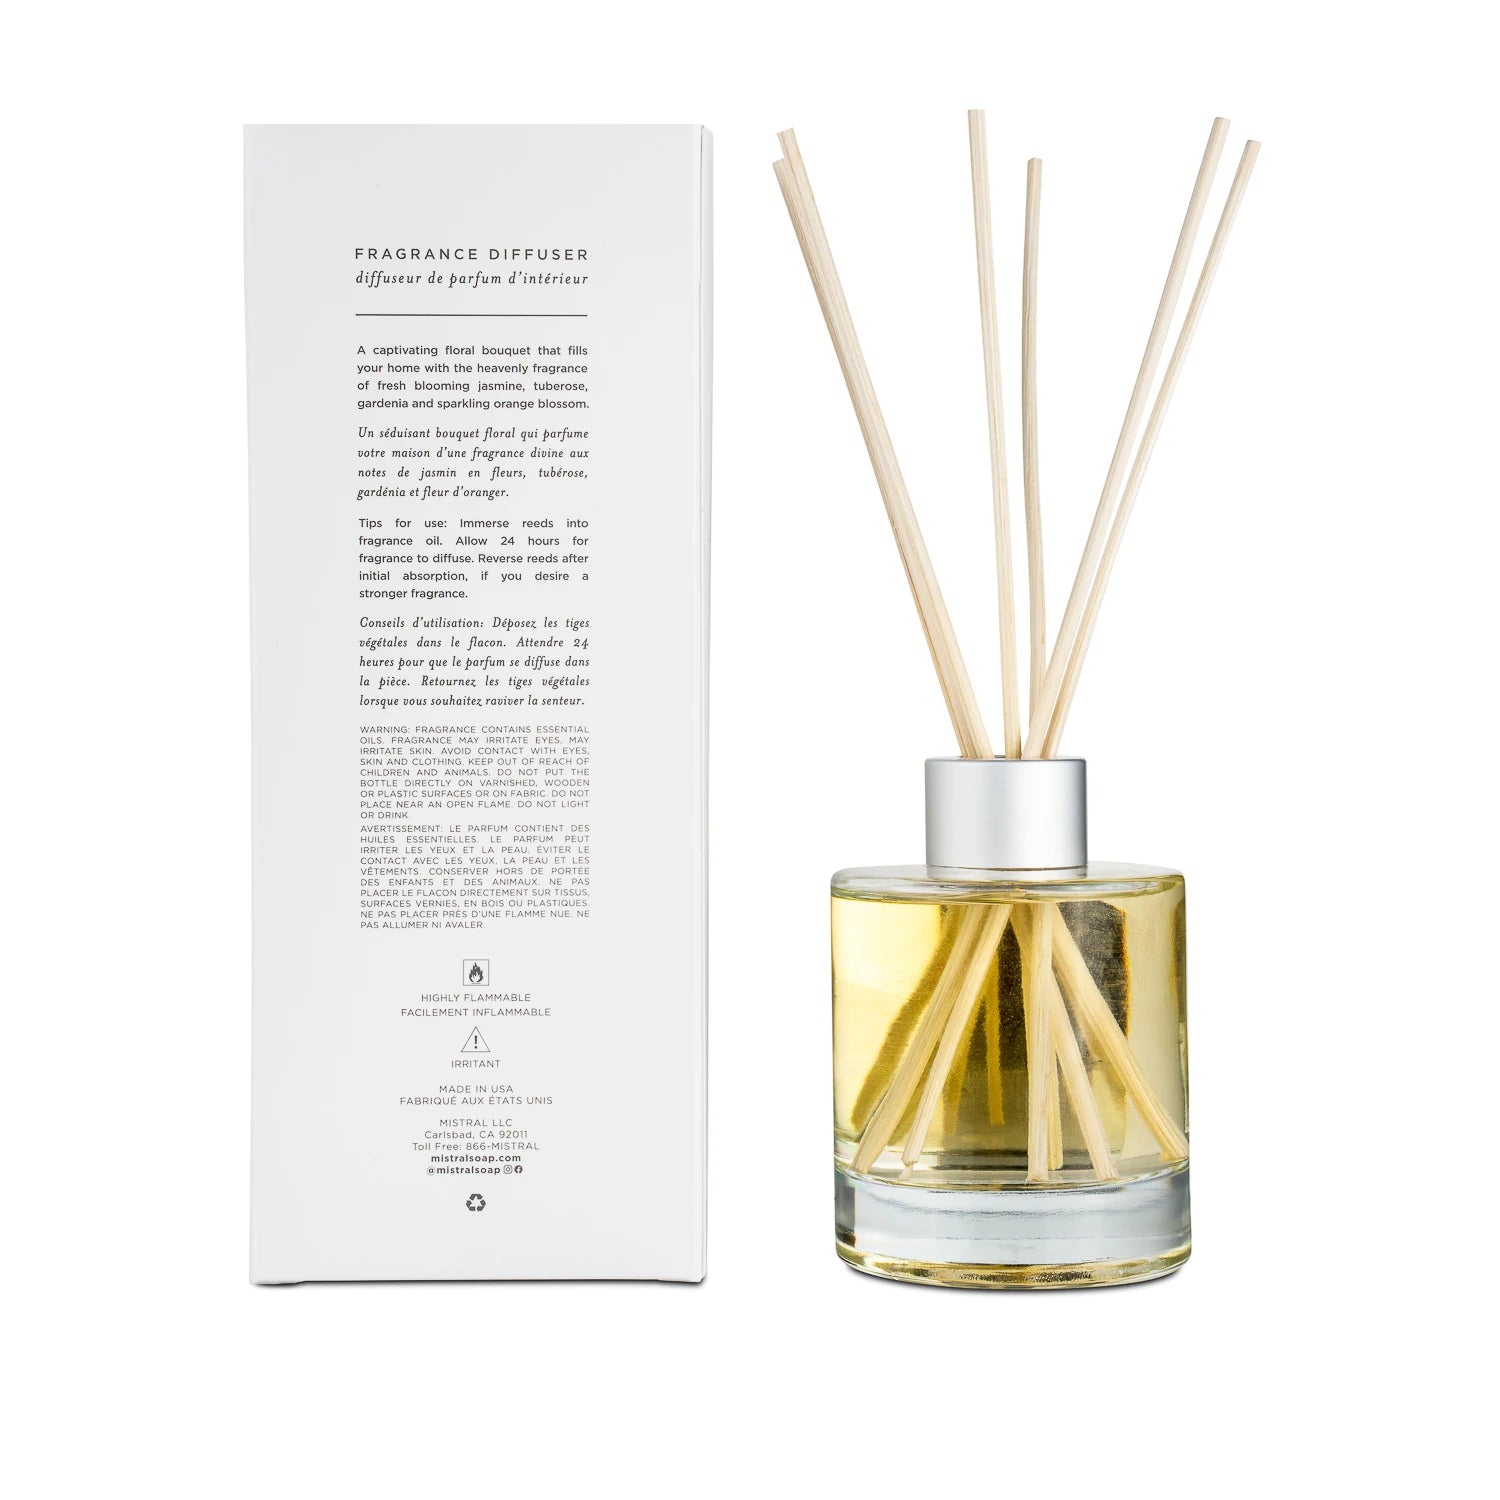 White Flowers Reed Diffuser